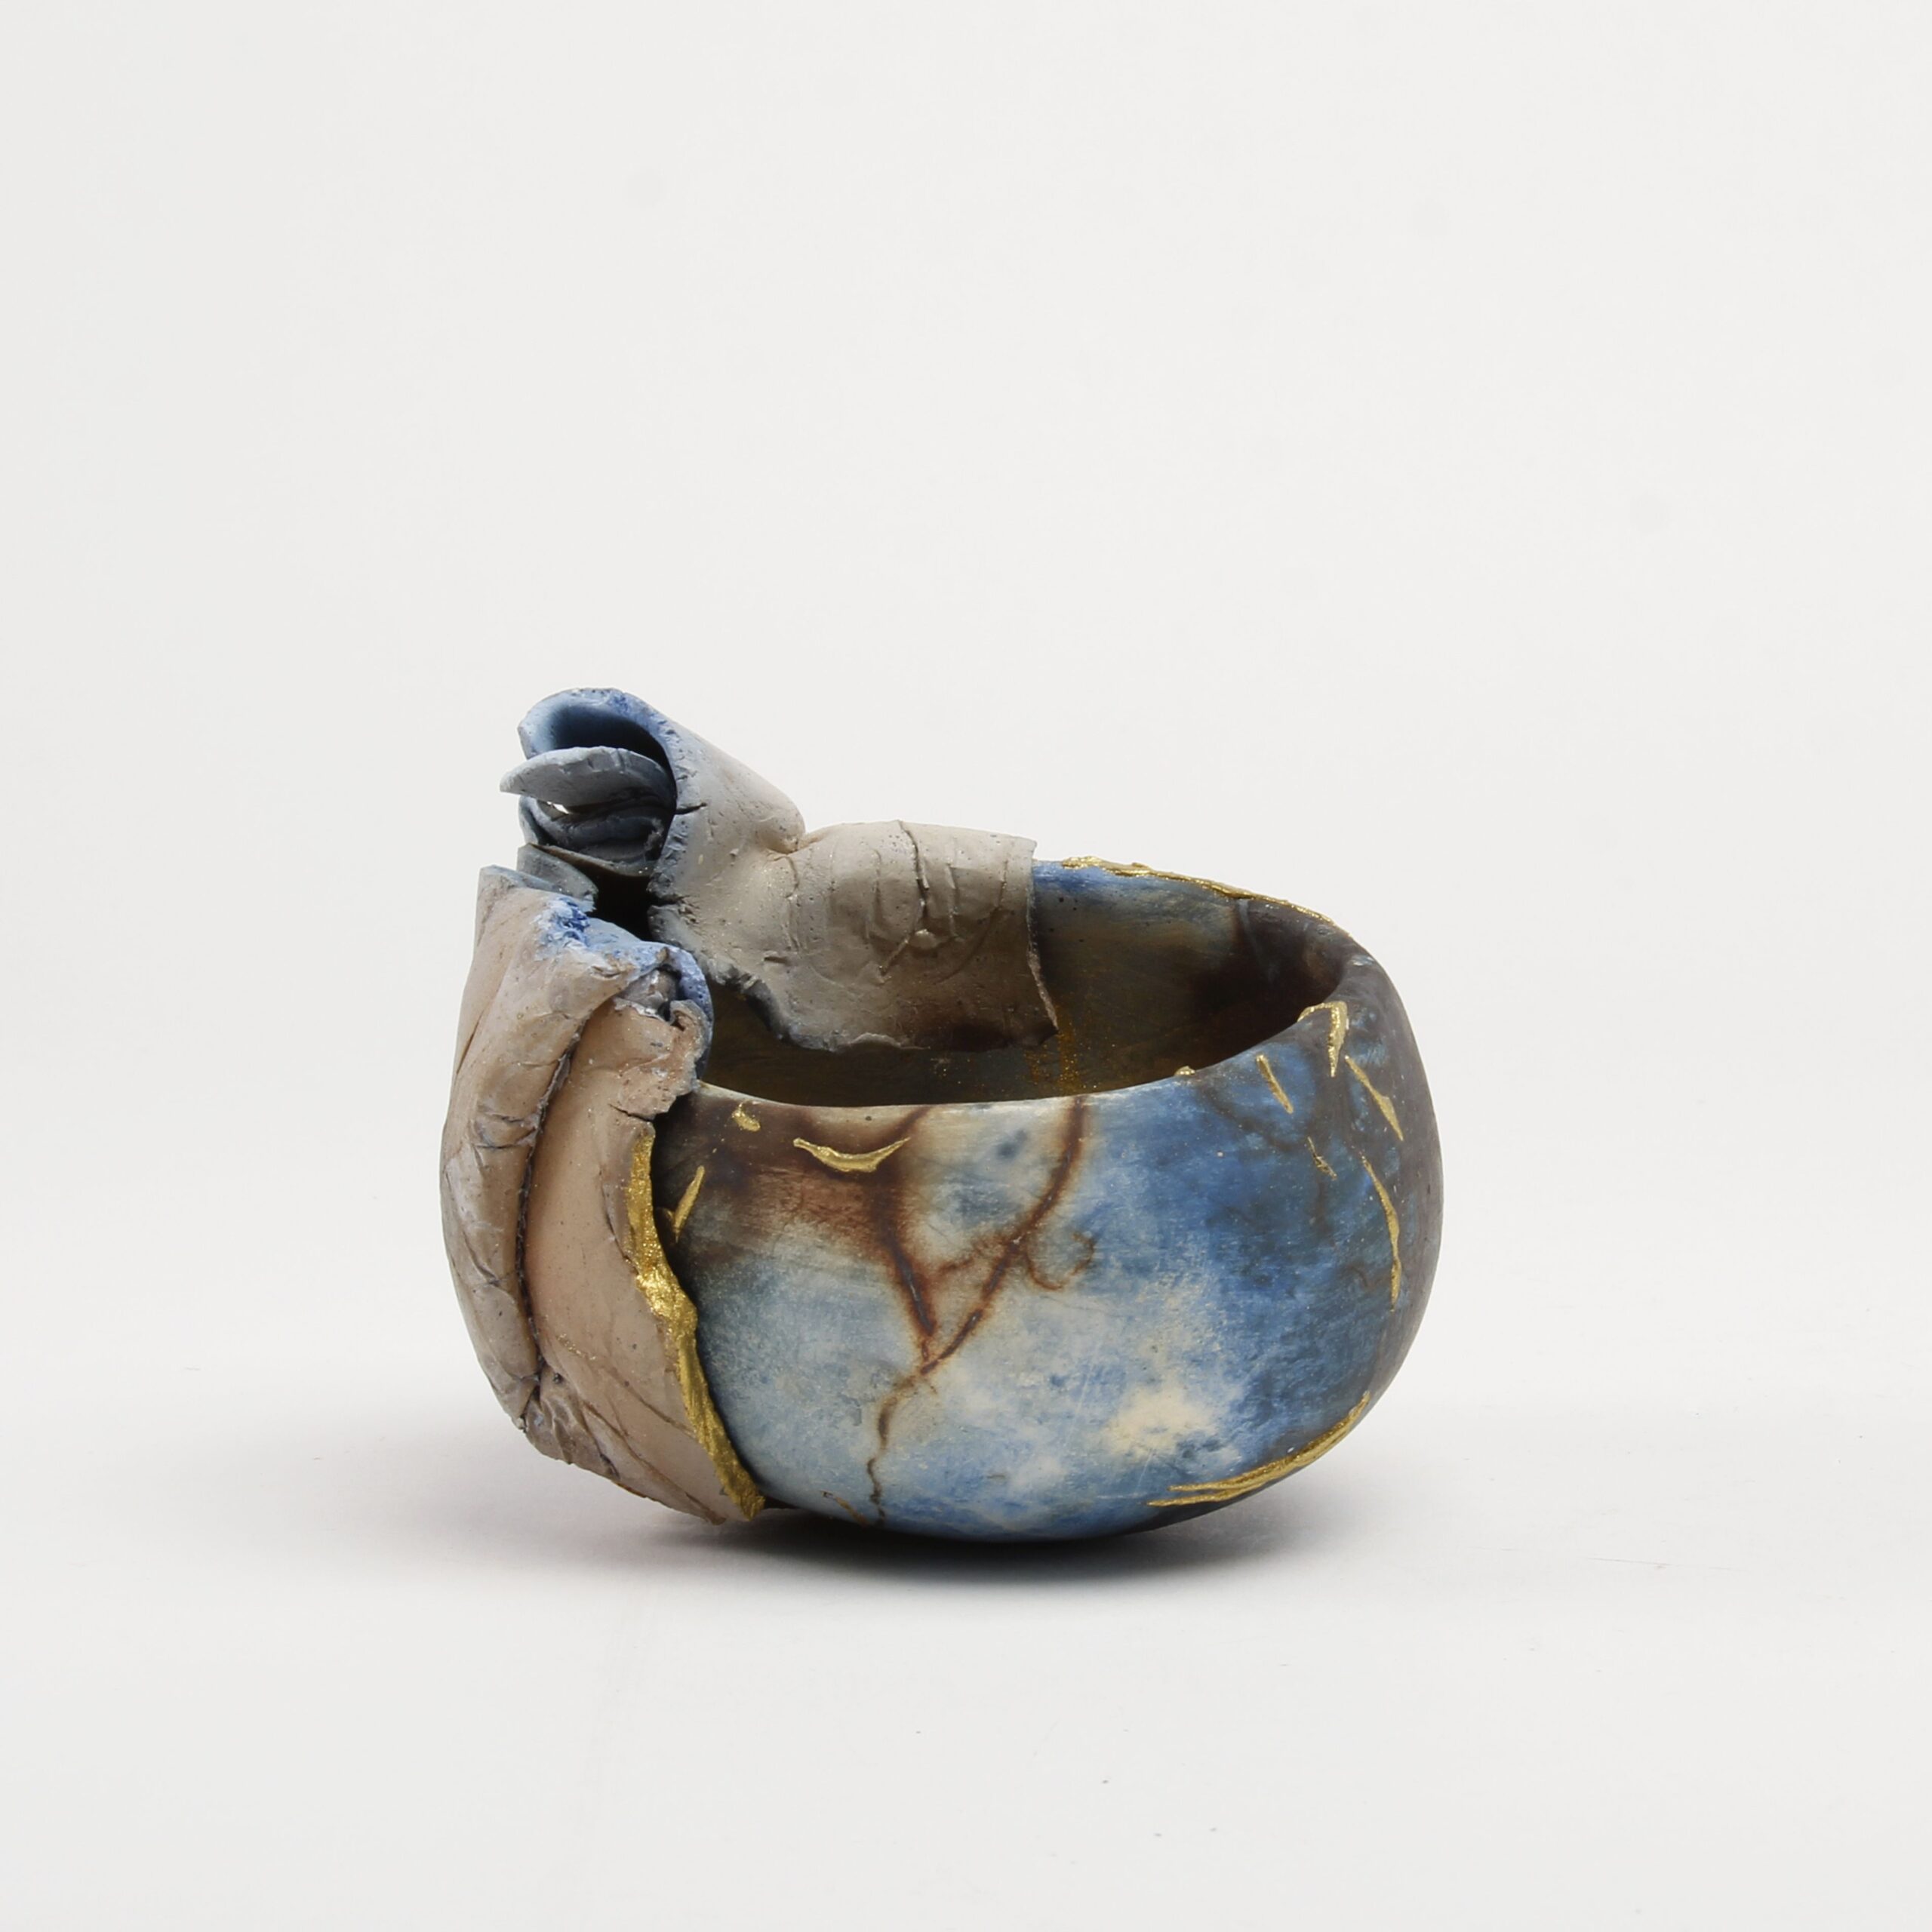 Alison Brannen: Shard cup Product Image 1 of 2